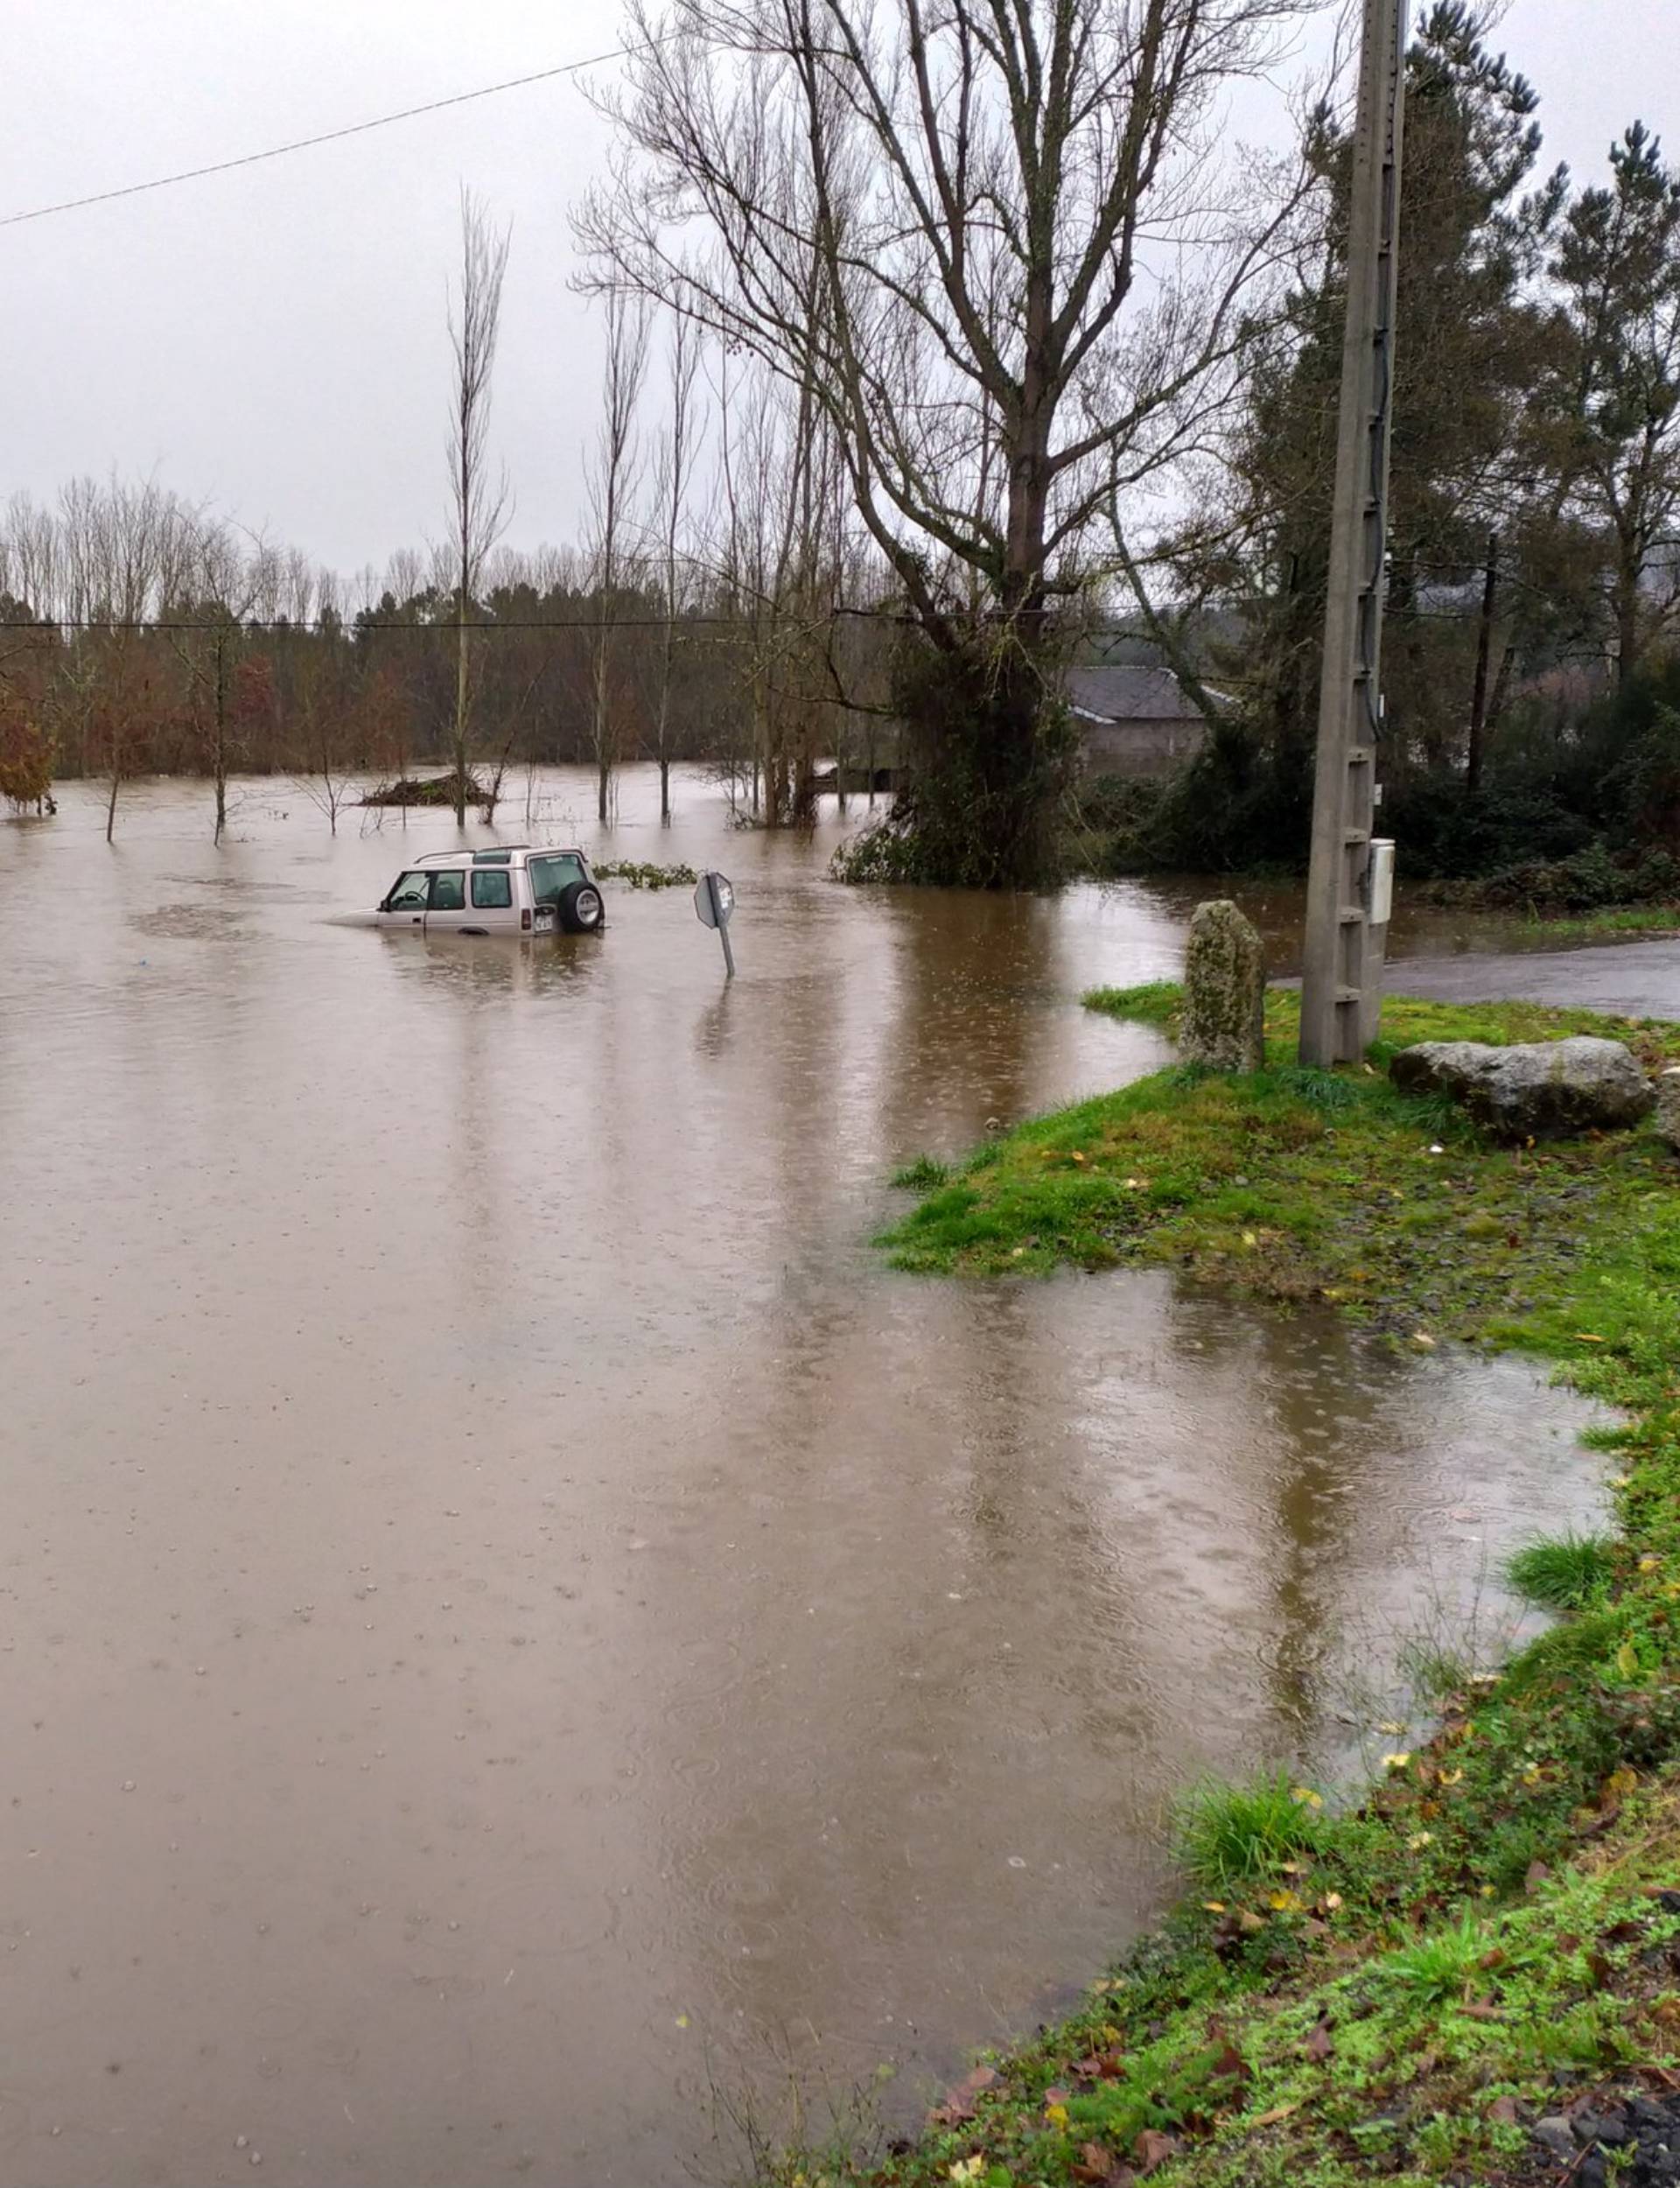 A car sits in floodwater after Storm Elsa swept throughout Galicia, in the province of Ourense